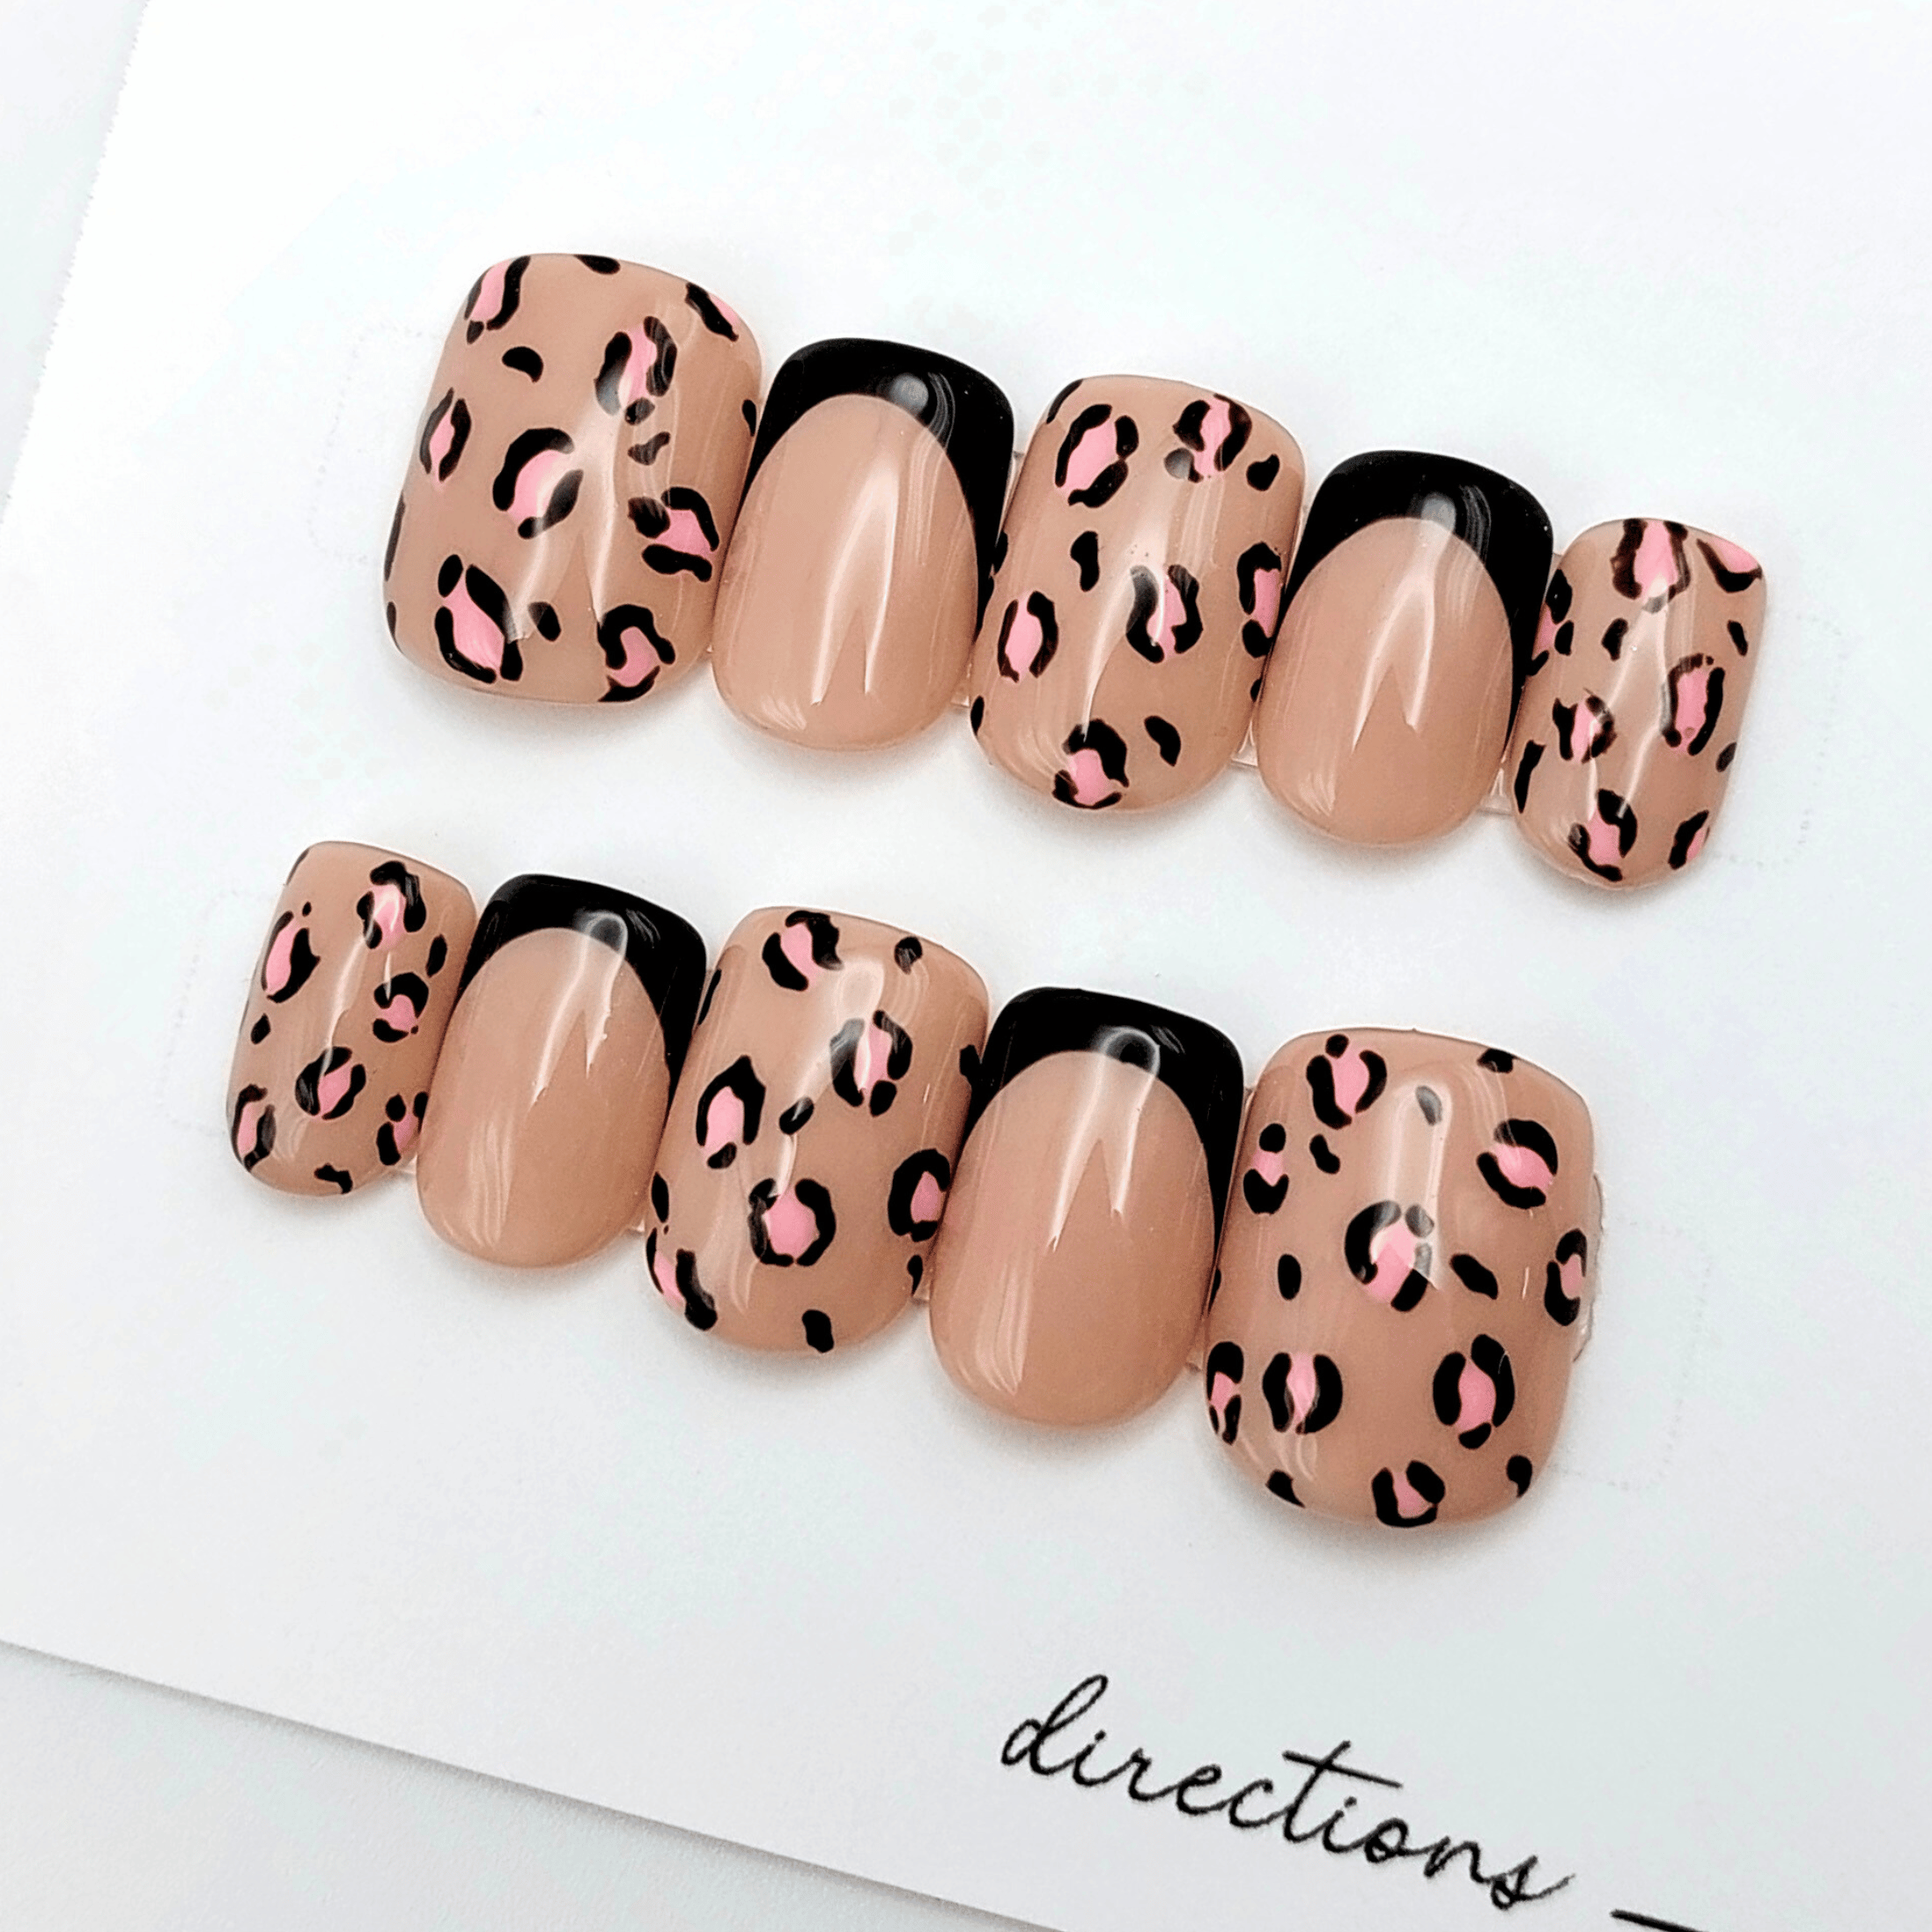 custom leopard press on nails with nude base and pink leopard spots on short squoval nails.